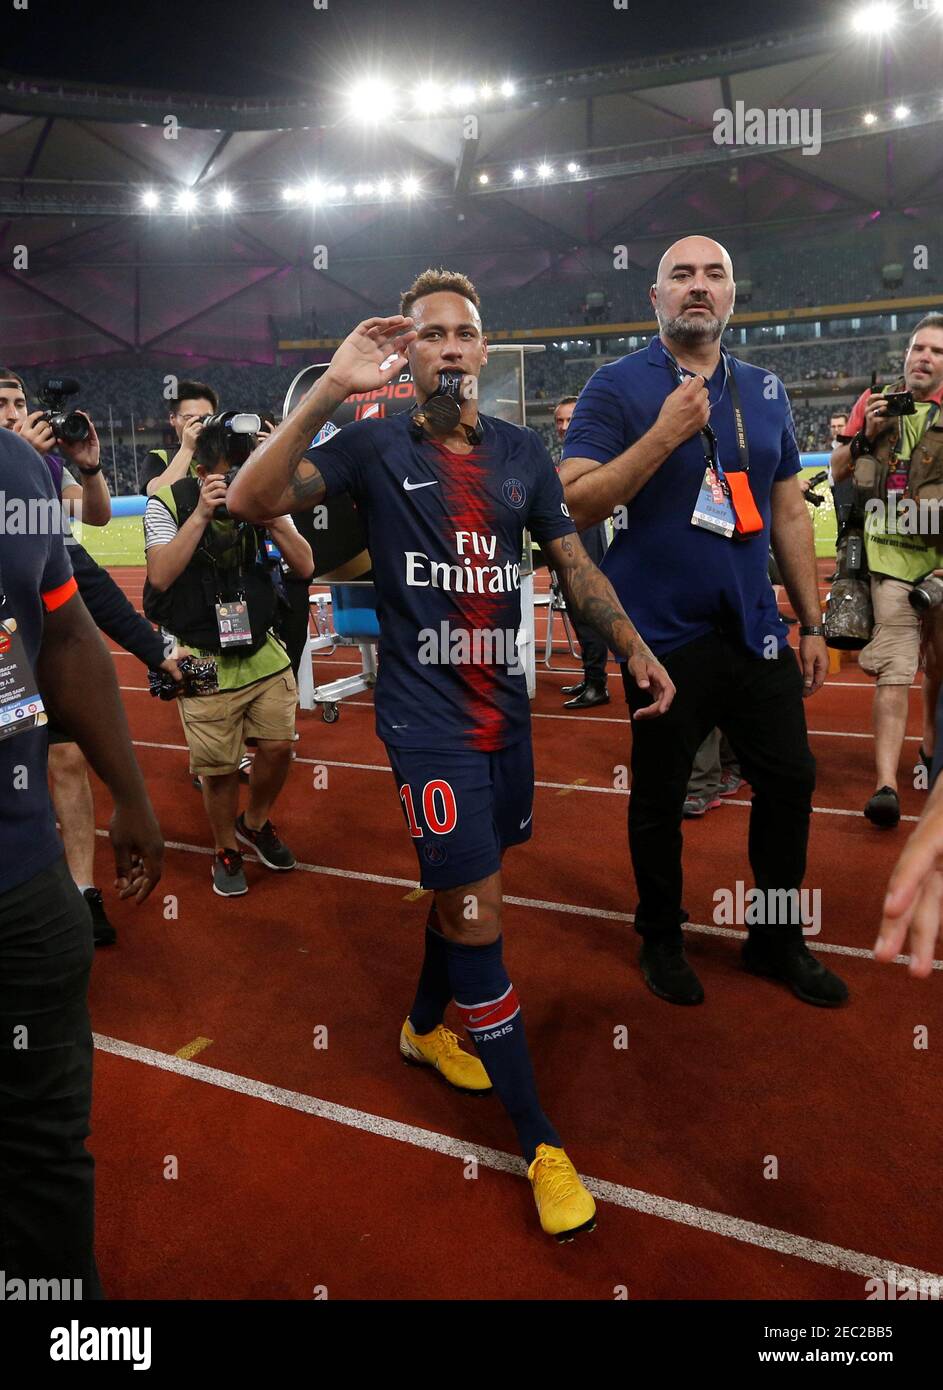 Soccer Football - French Super Cup Trophee des Champions - Paris St Germain v AS Monaco - Shenzhen Universiade Sports Centre, Shenzhen, China - August 4, 2018   Paris St Germain's Neymar celebrates after winning the French Super Cup   REUTERS/Bobby Yip Stock Photo